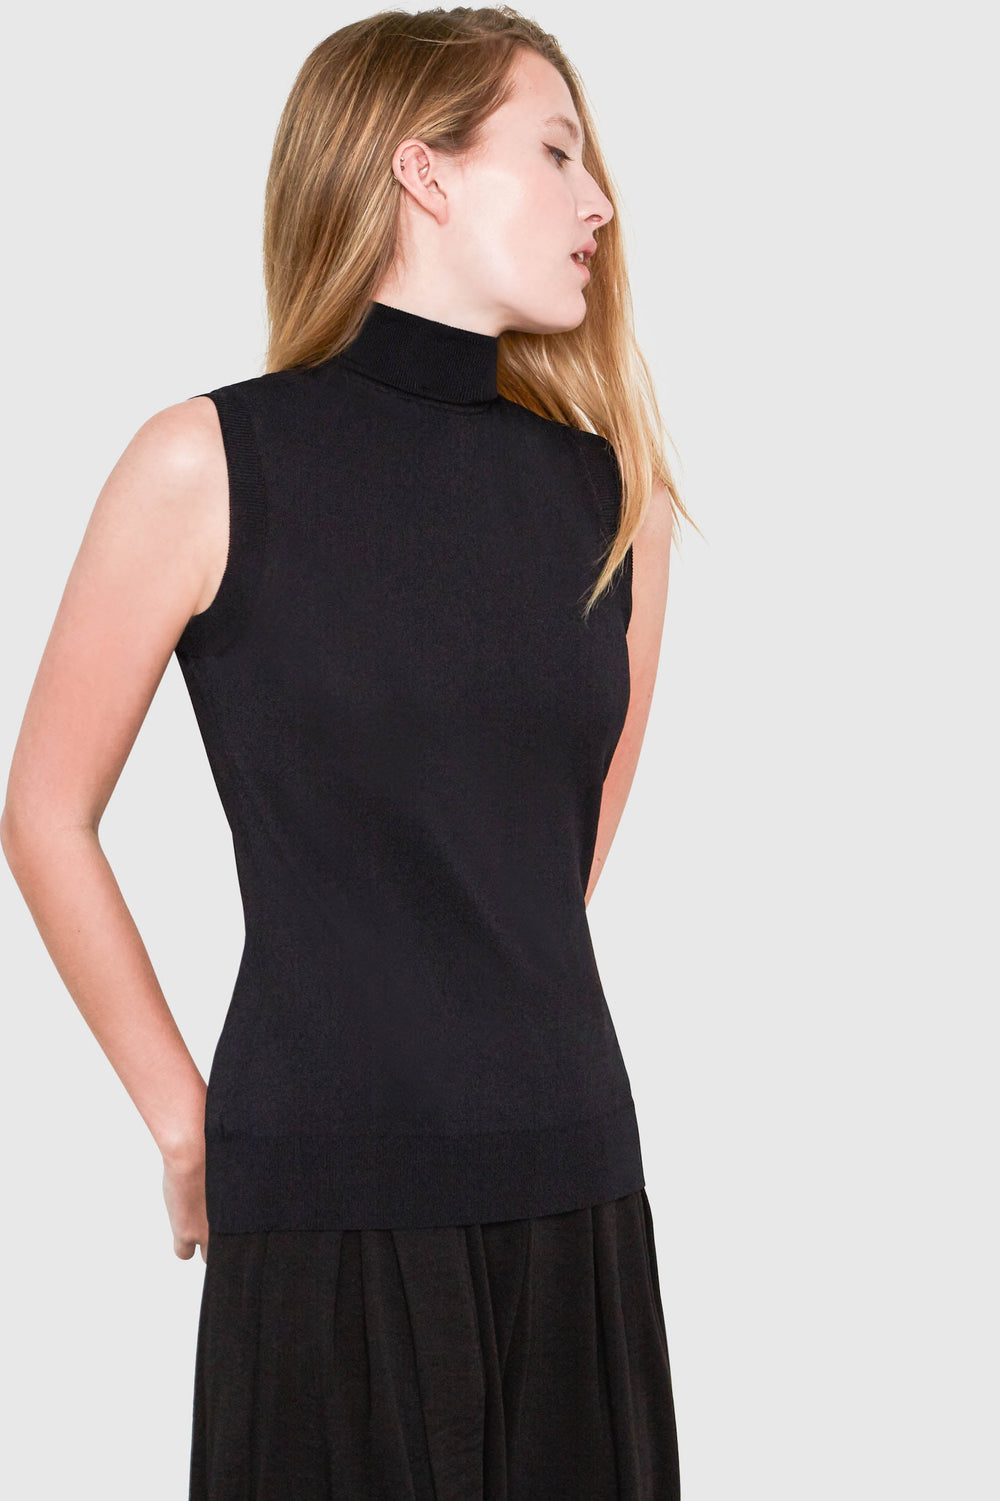 Sleeveless viscose sweater in black features a sleek turtleneck and is made of luxurious Italian yarn. 